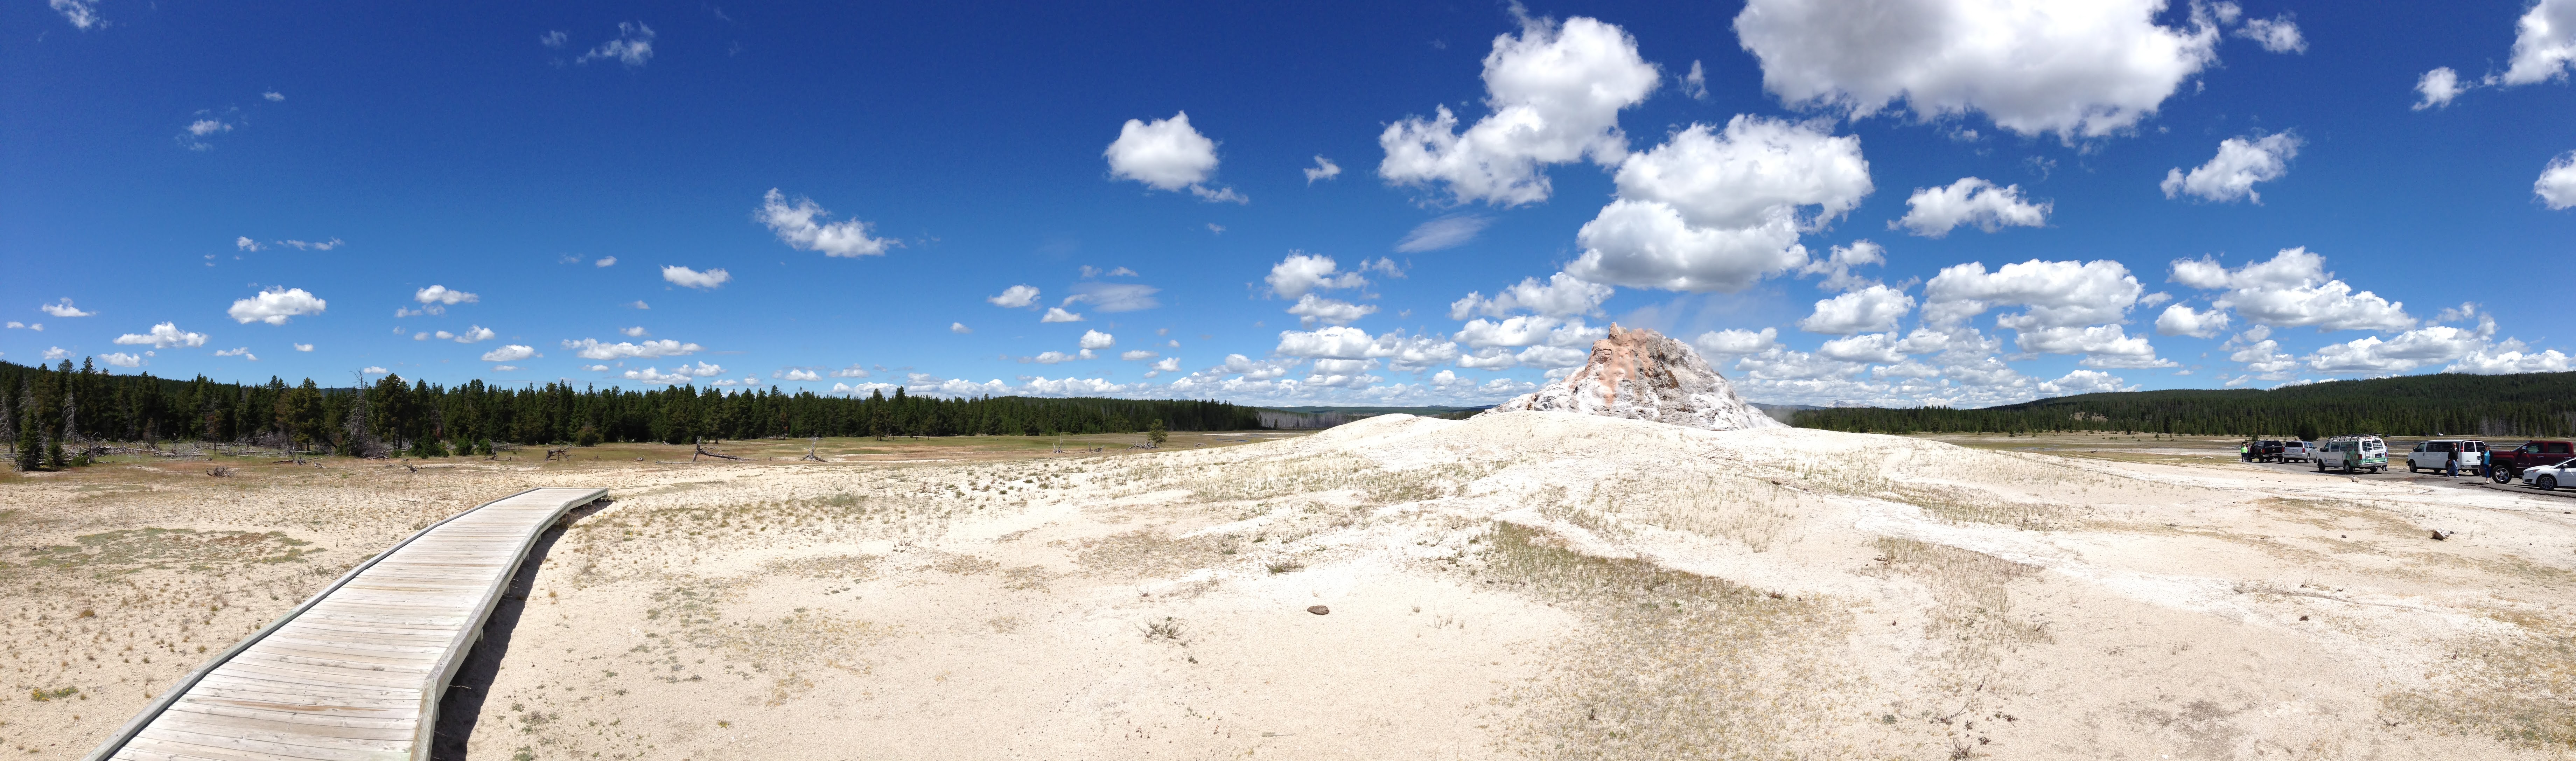 White Dome Geyser Yellowstone National Park